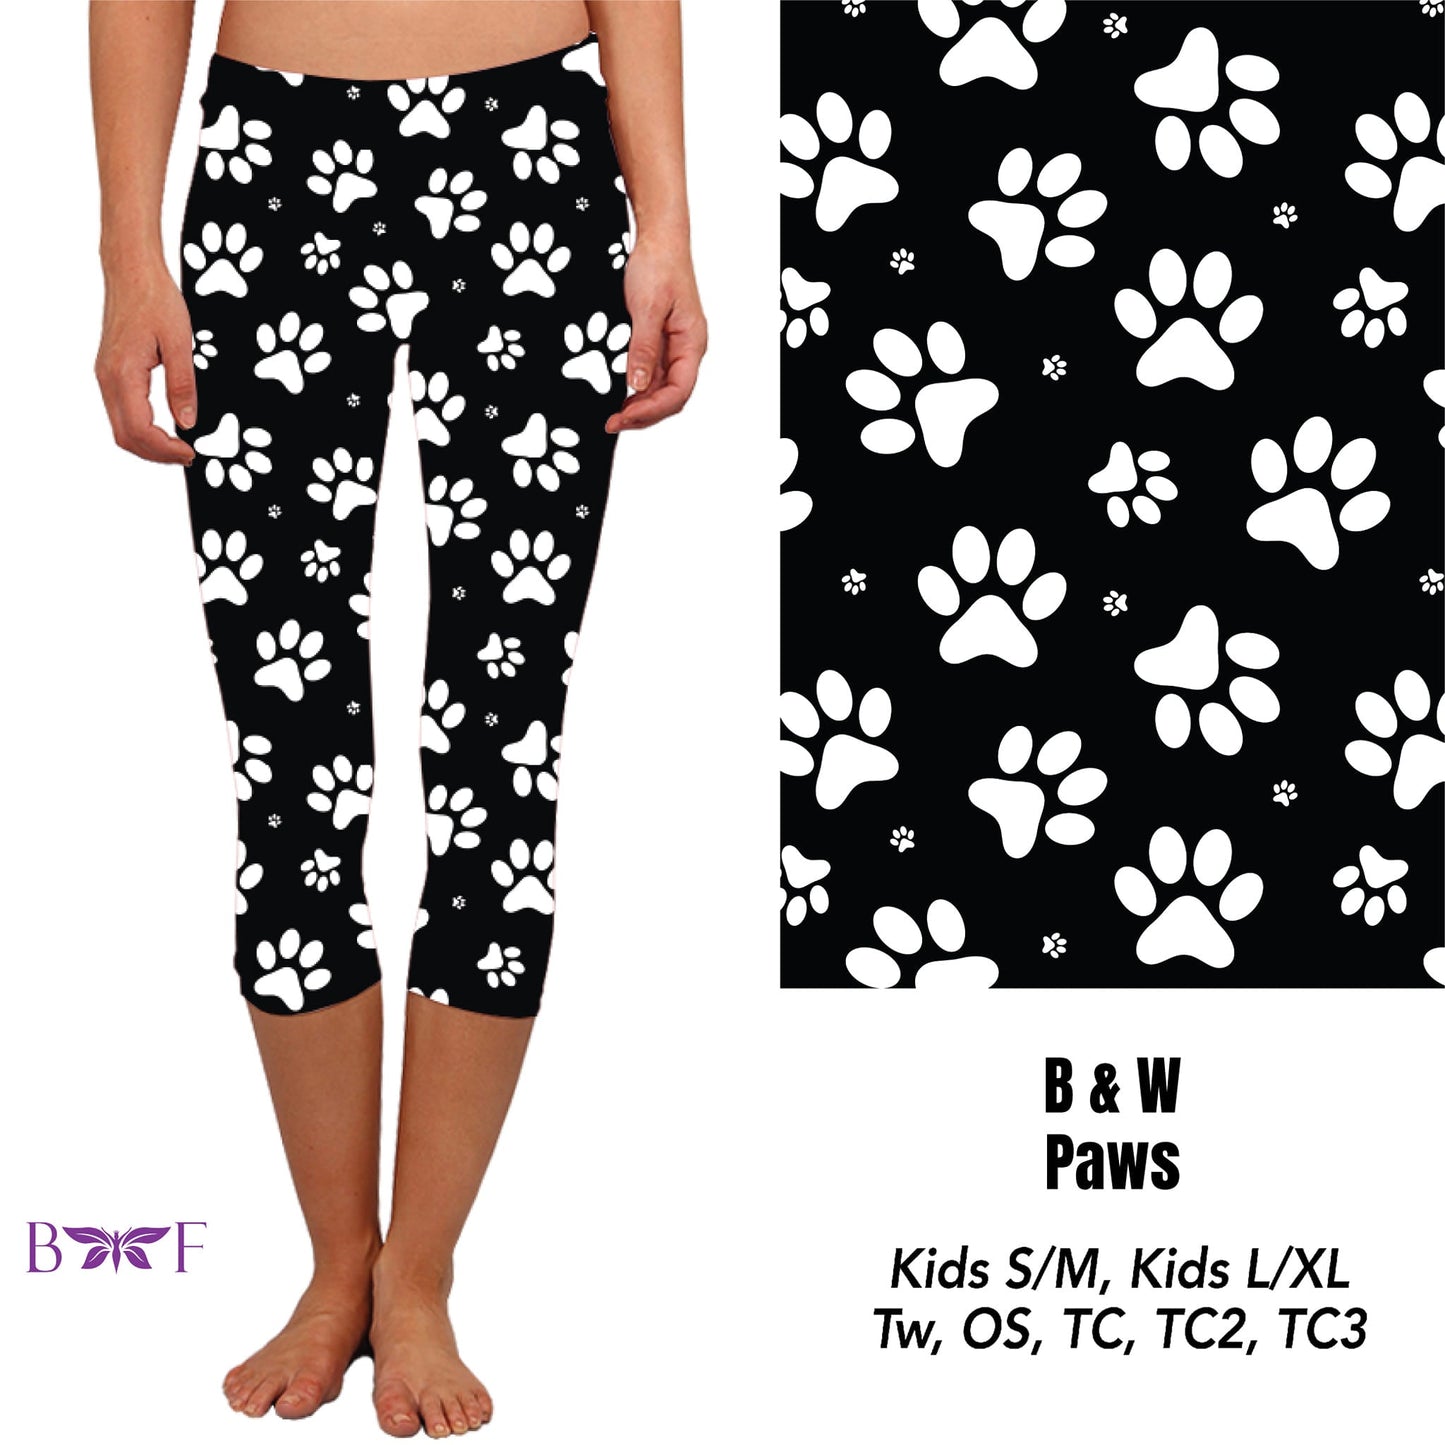 B & W Paws Leggings and Capris with pockets